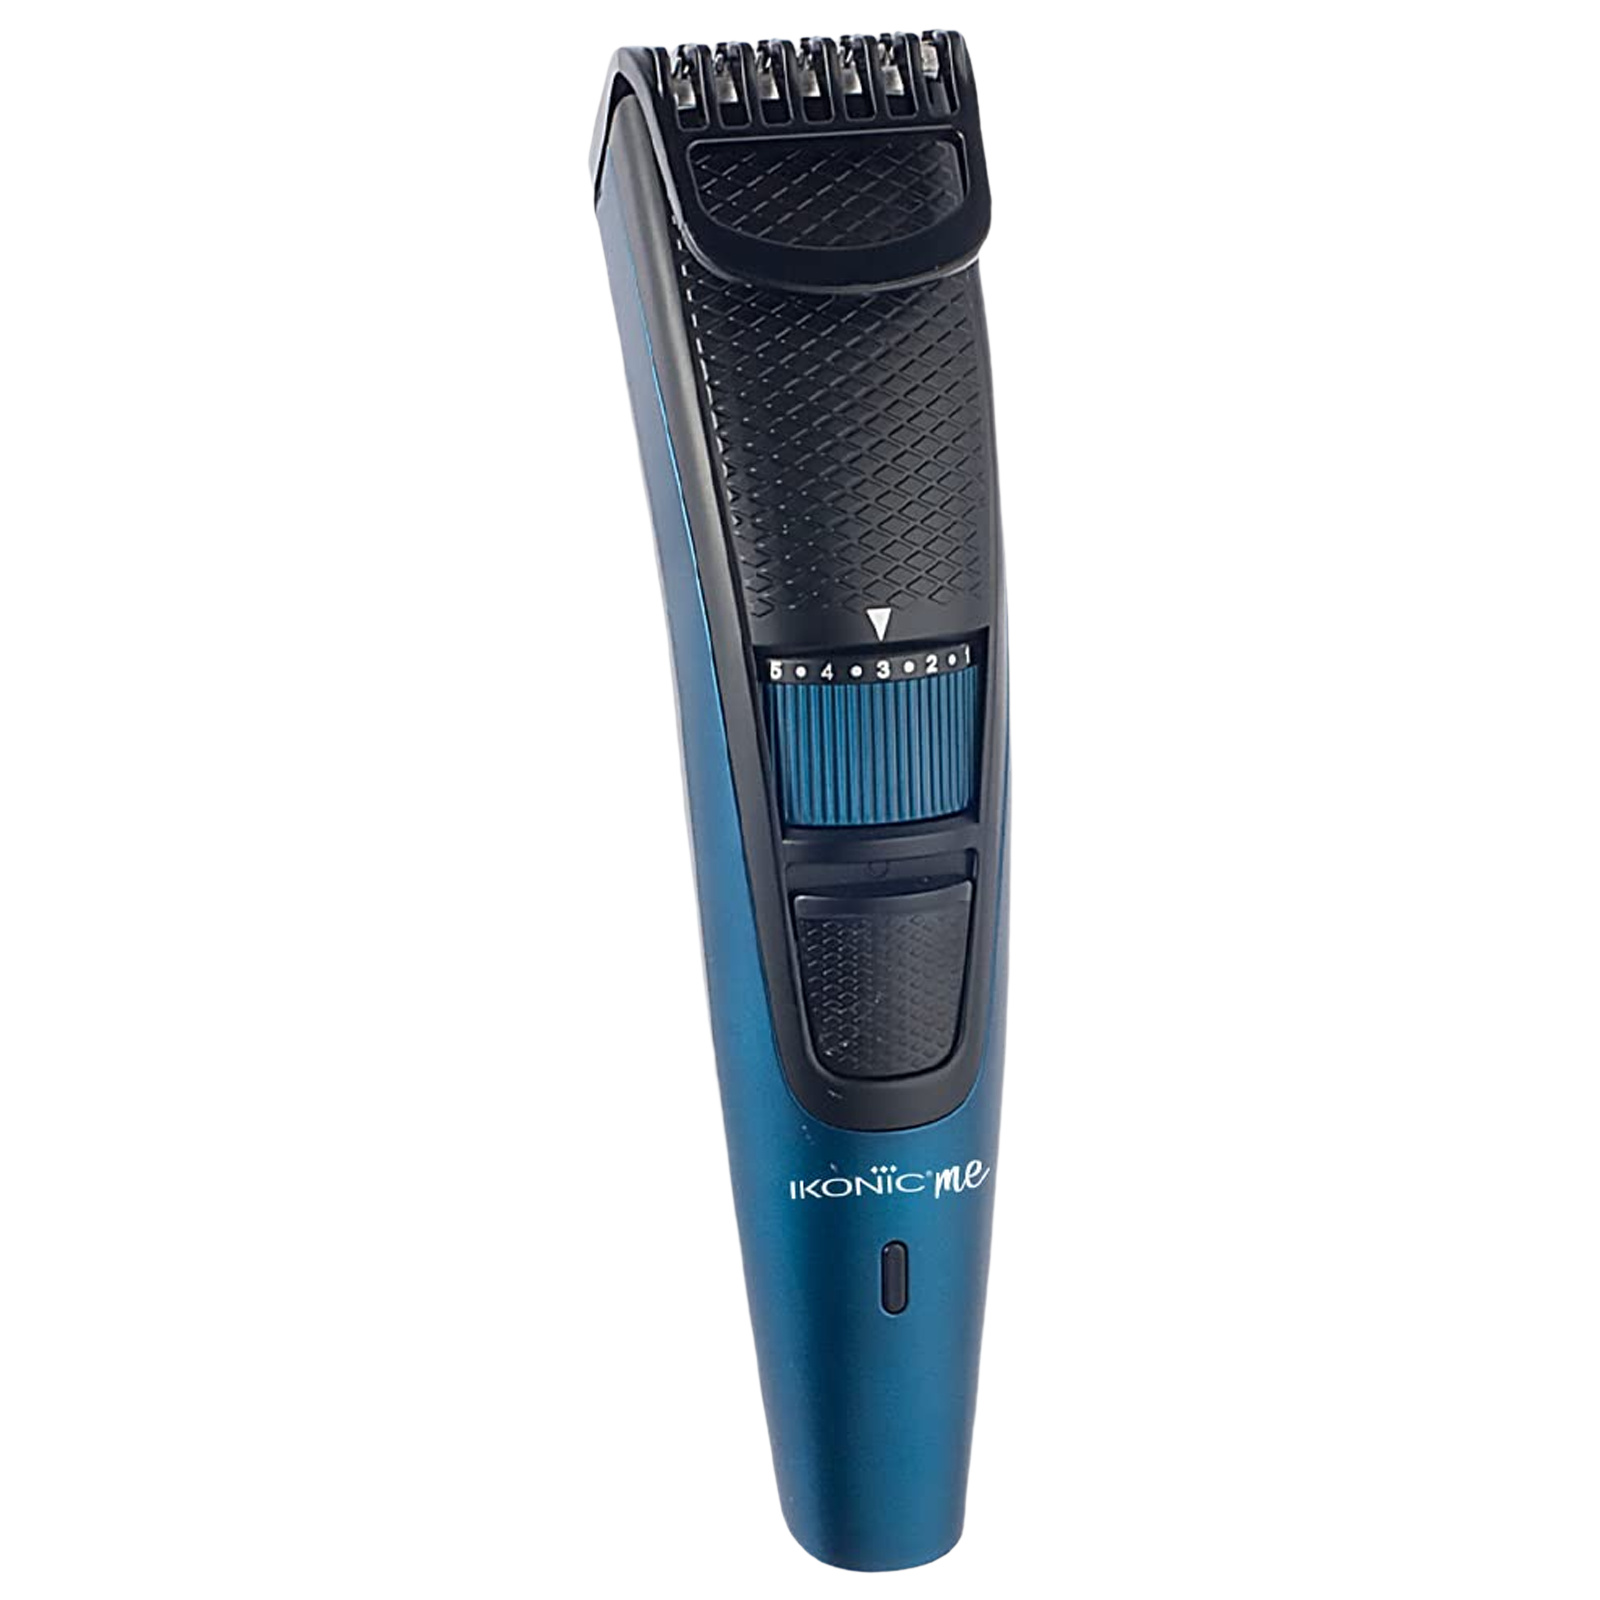 Ikonic Rechargeable Cordless Dry Trimmer for Hair with 10 Length Settings for Men (50mins Runtime, Low Noise, Blue)